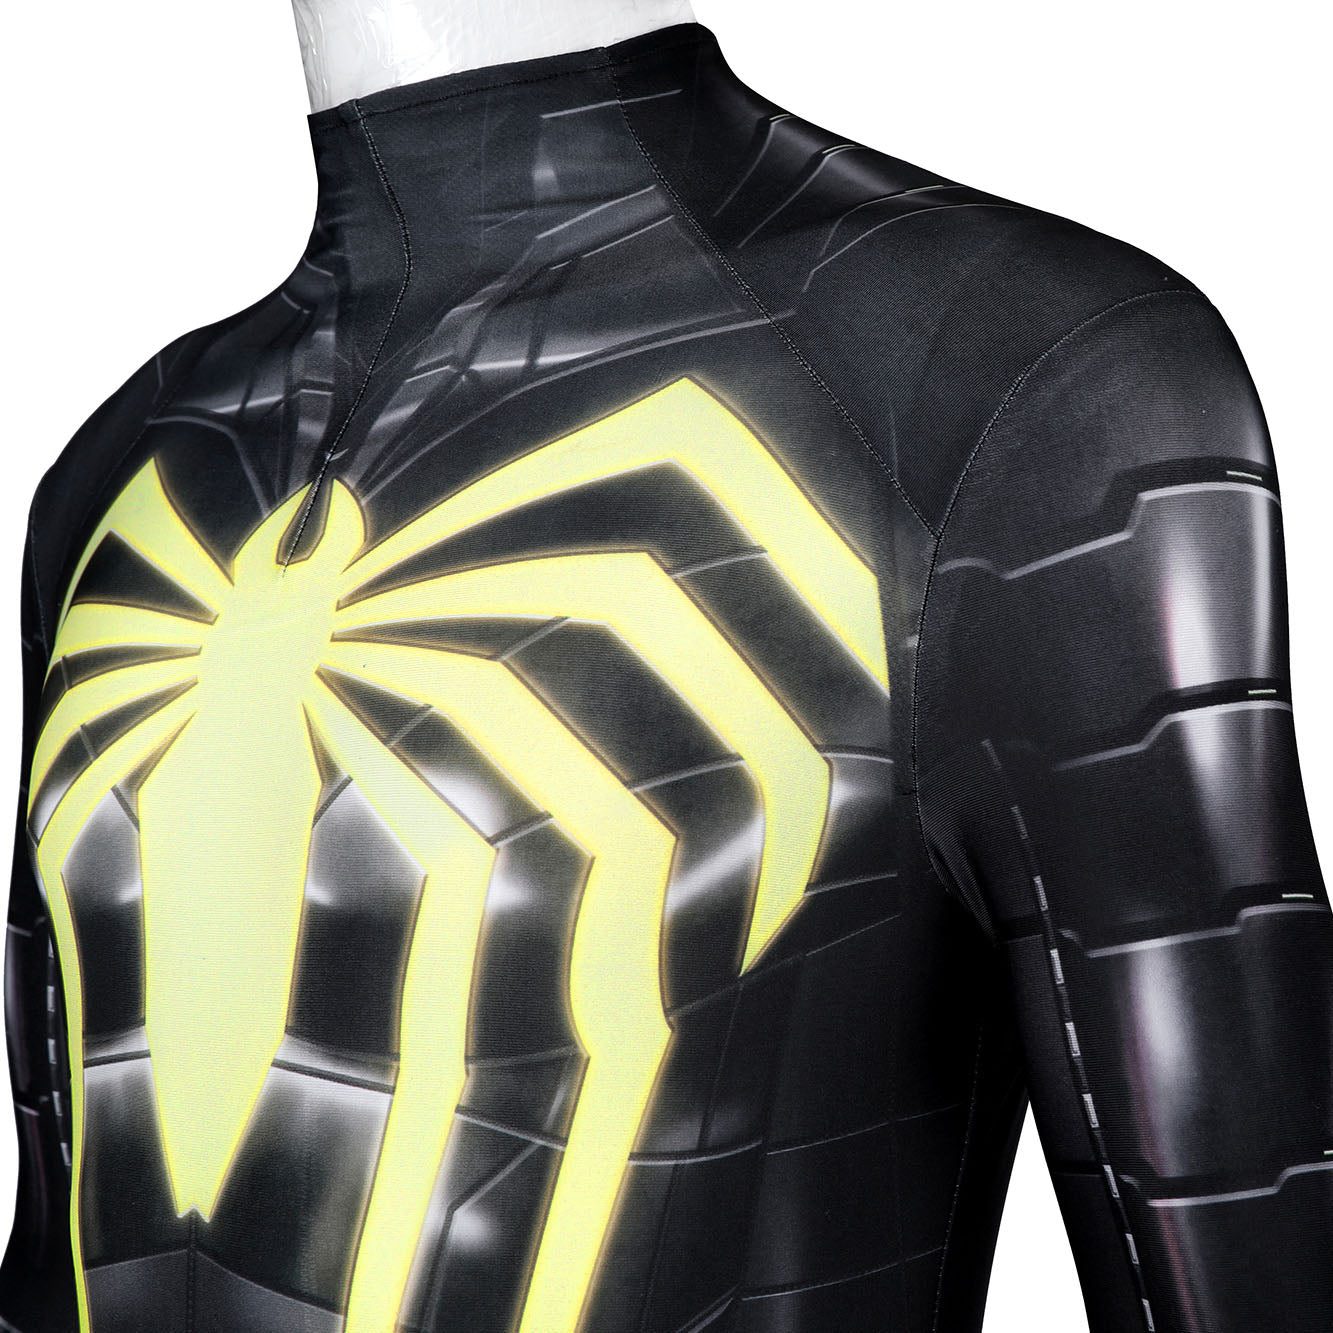 Marvel's Spider-man Anti-Ock Suit Male Jumpsuit Cosplay Costumes